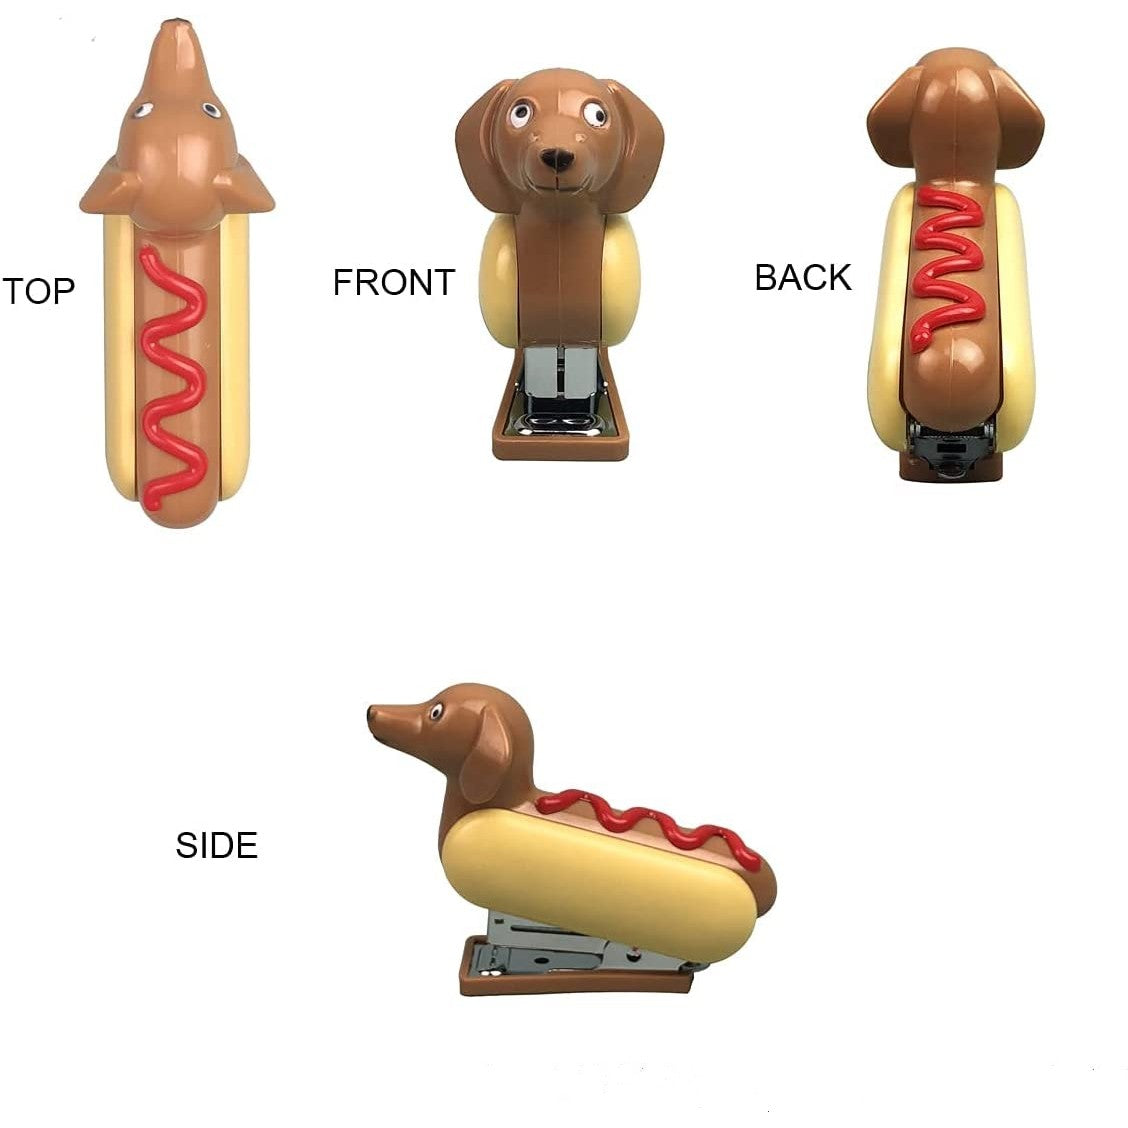 Four different views of a hot dog shaped stapler.